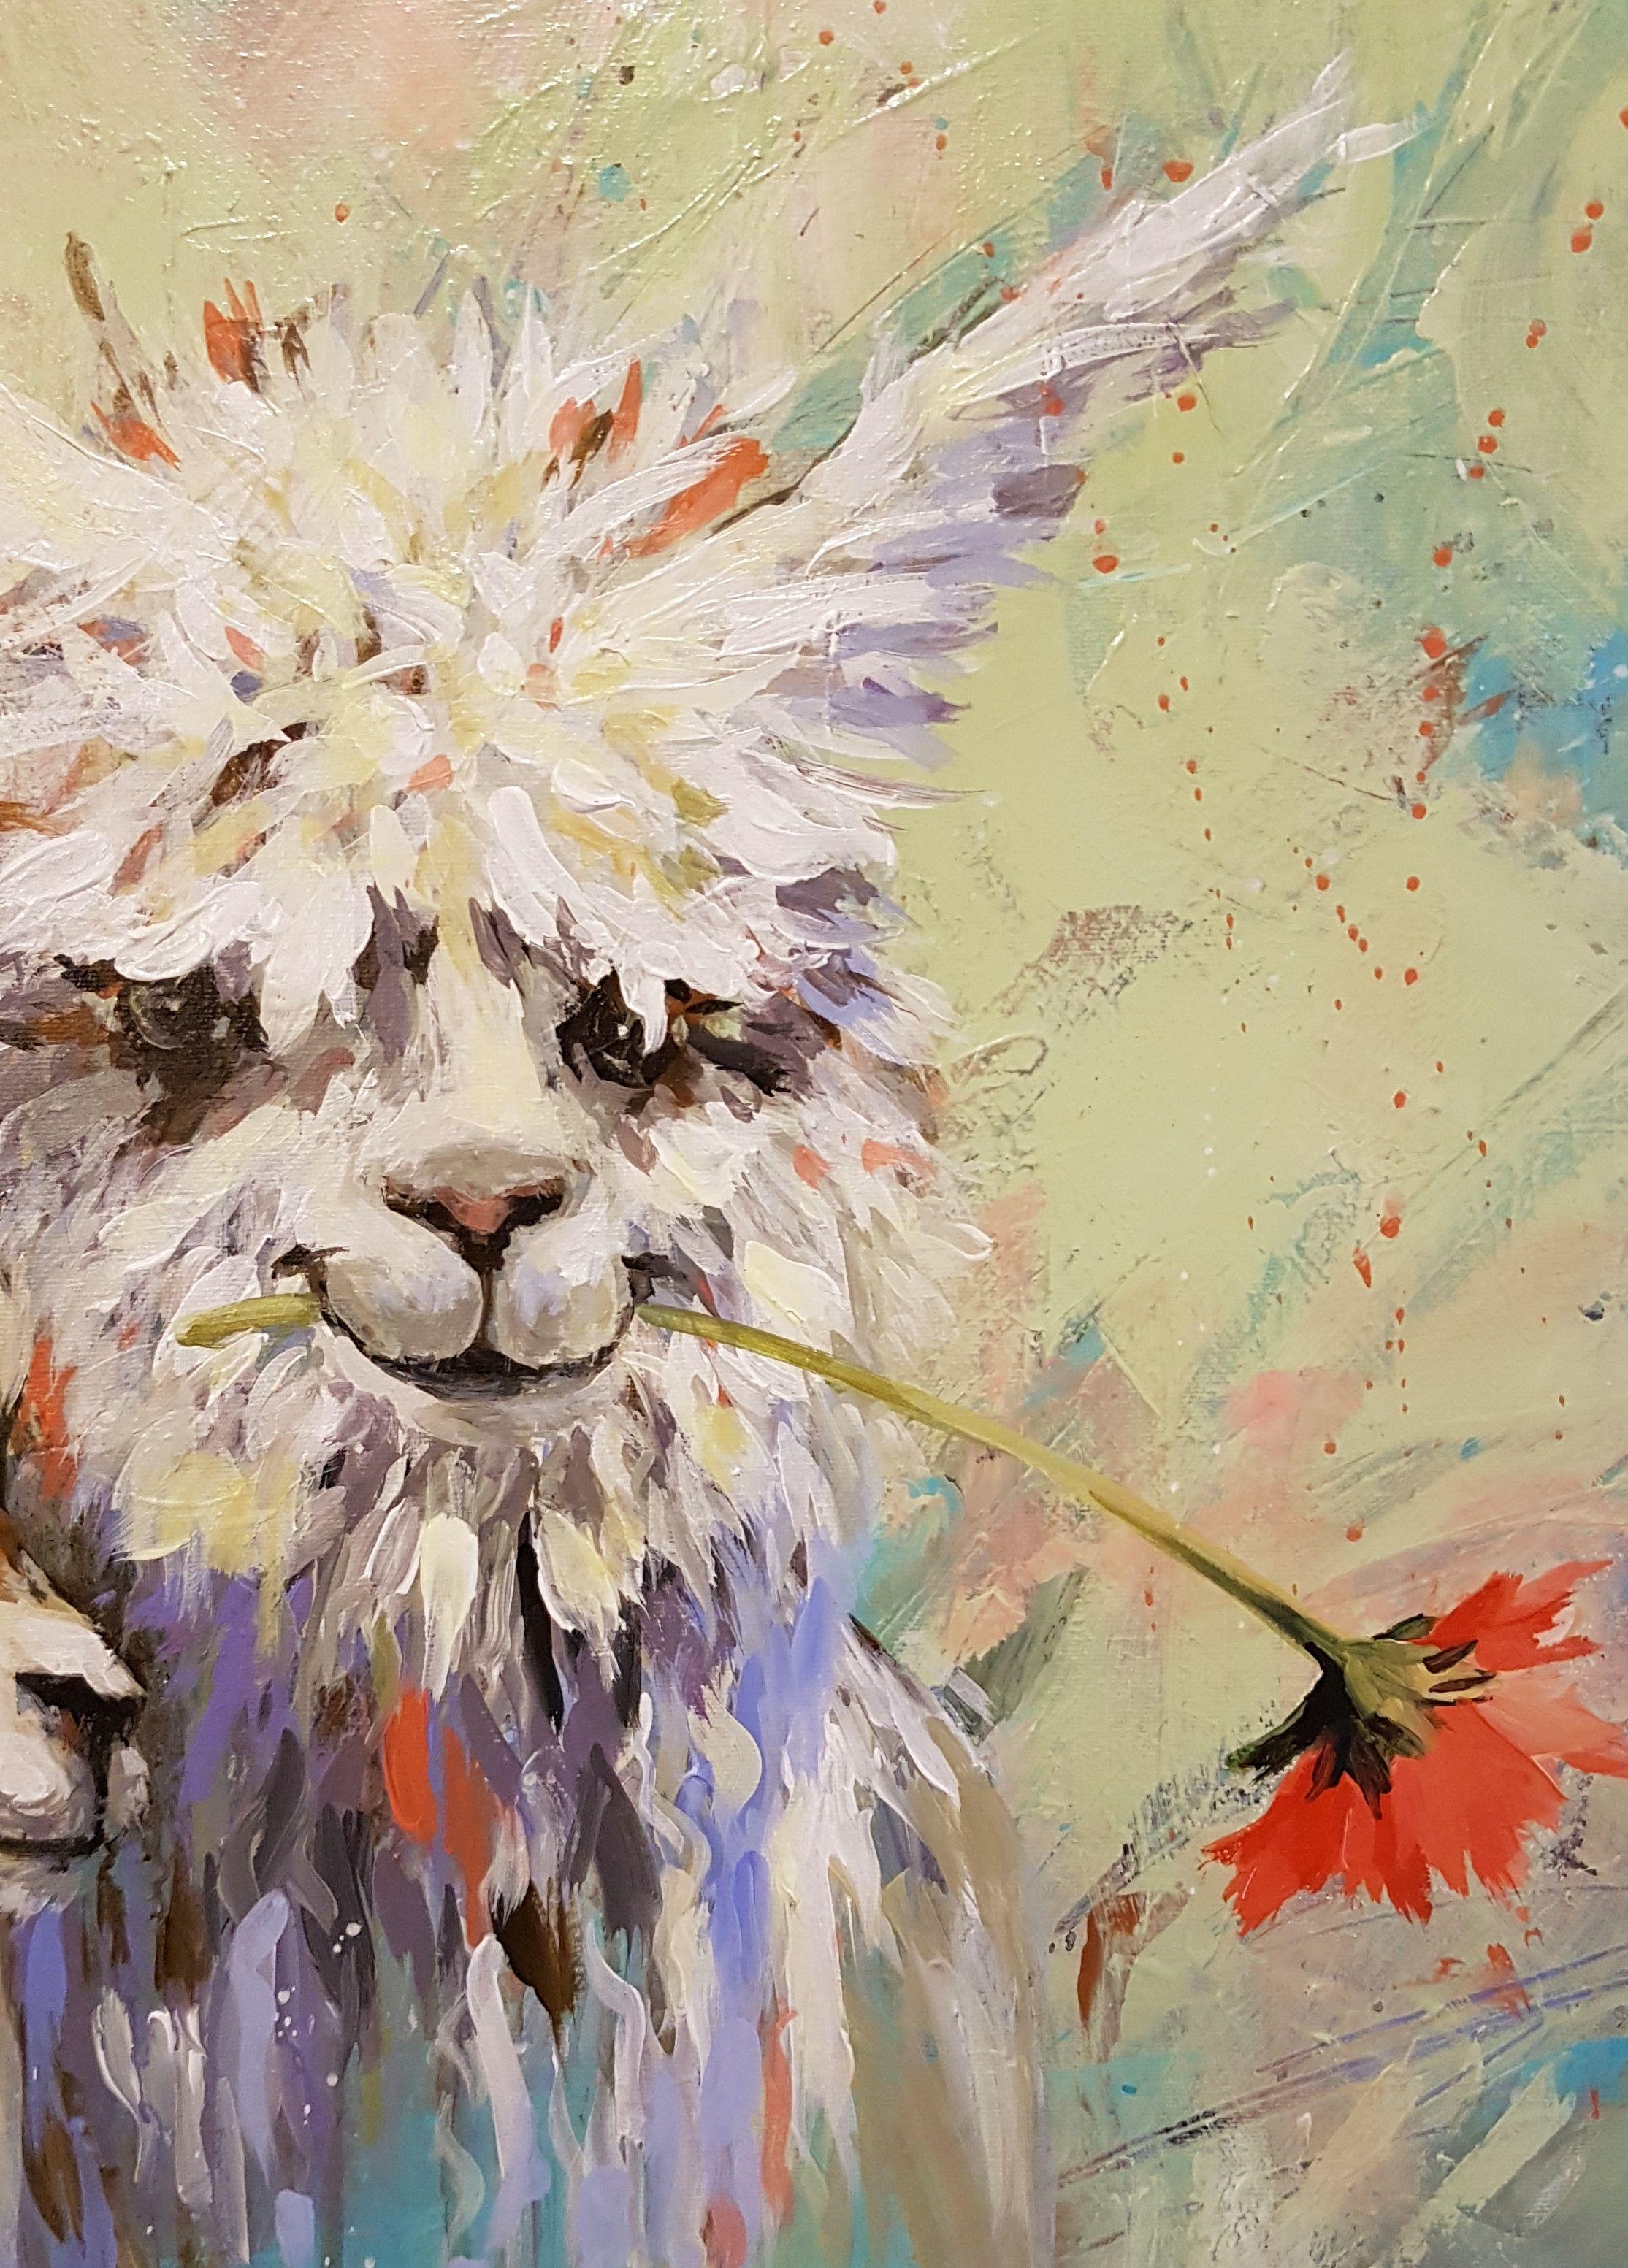 Fun contemporary depiction of 2 llamas. Lots of drips and textures. Soft greens and pinks in the background but overall quite a neutral palette.   This is an original signed piece of art. Remember, there is always so much more detail and rich color